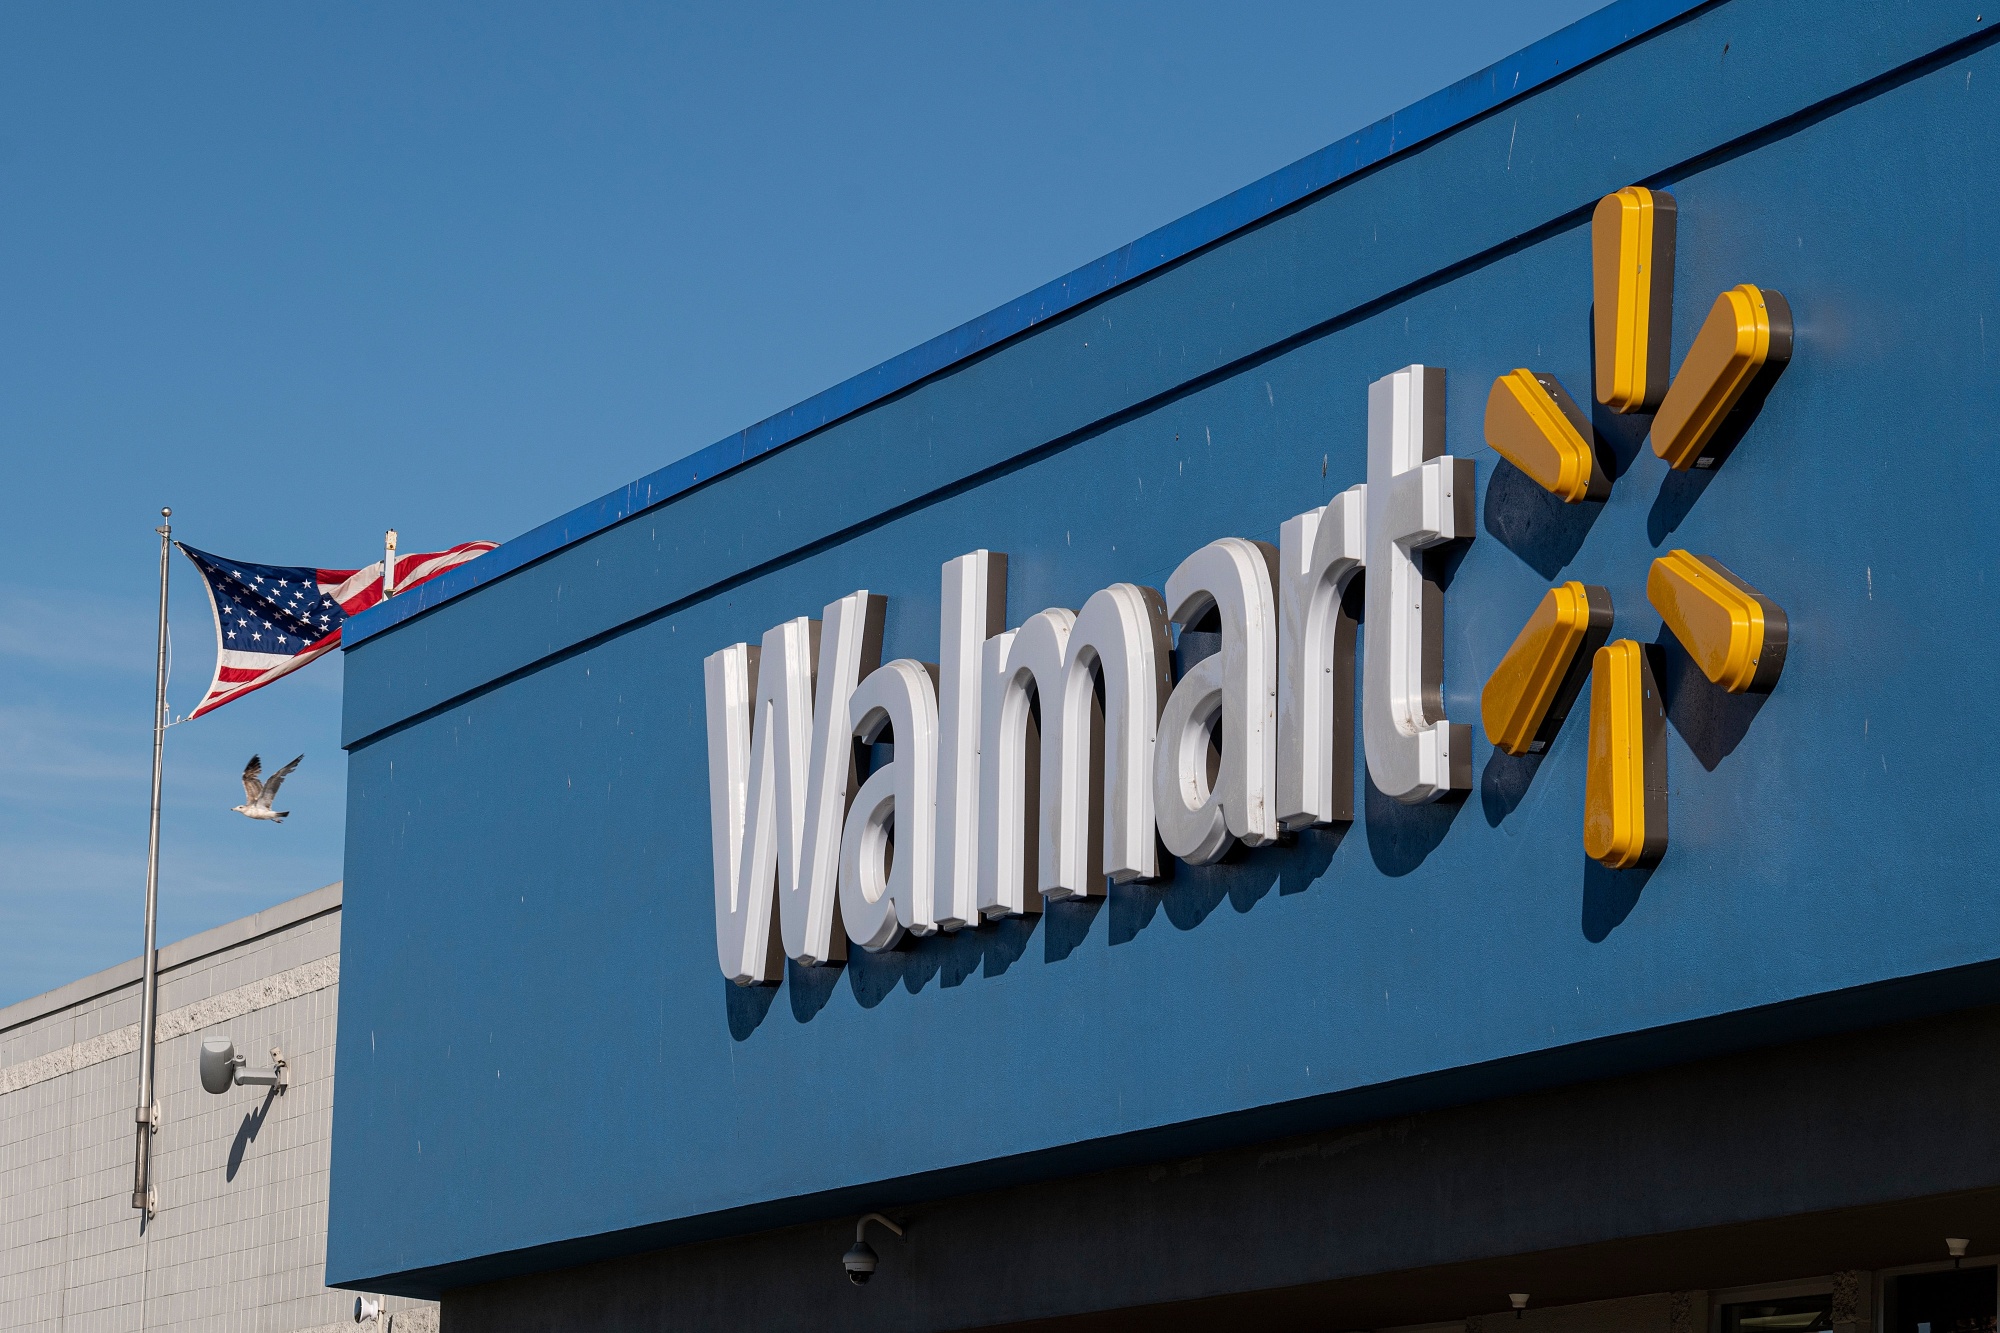 You Can Now Buy Bitcoin at Some Walmart Stores Across the U.S.